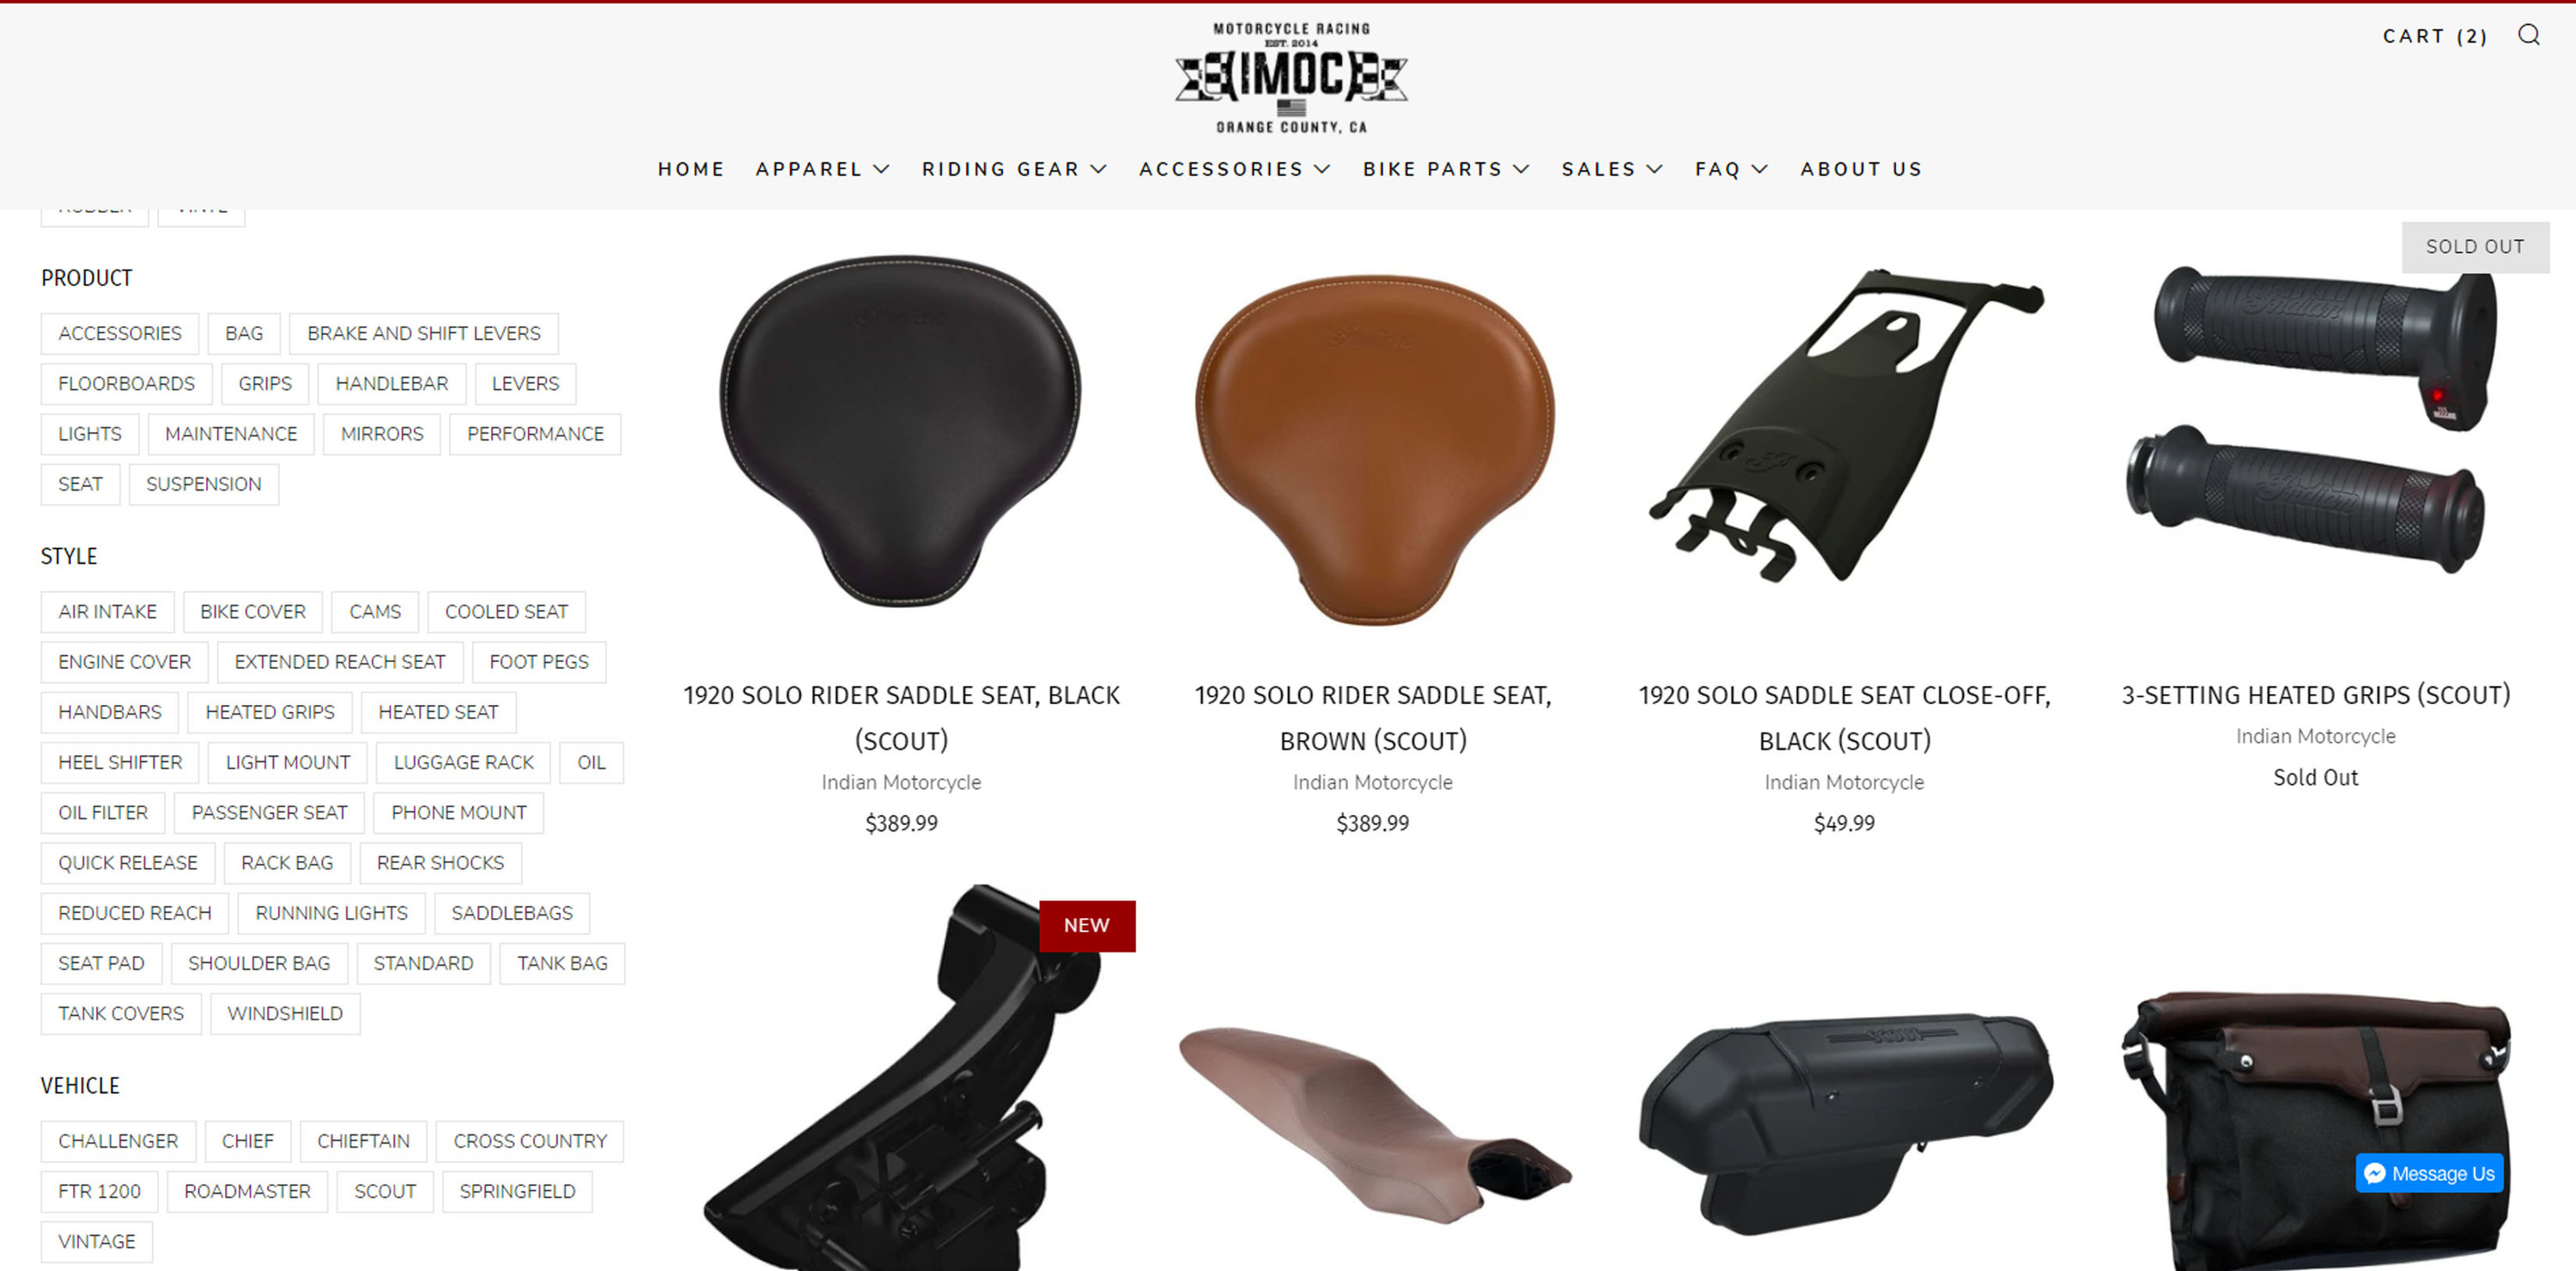 Indian Motorcycle® parts & accessories online shop with seats, handlebar grips, and bags for sale.